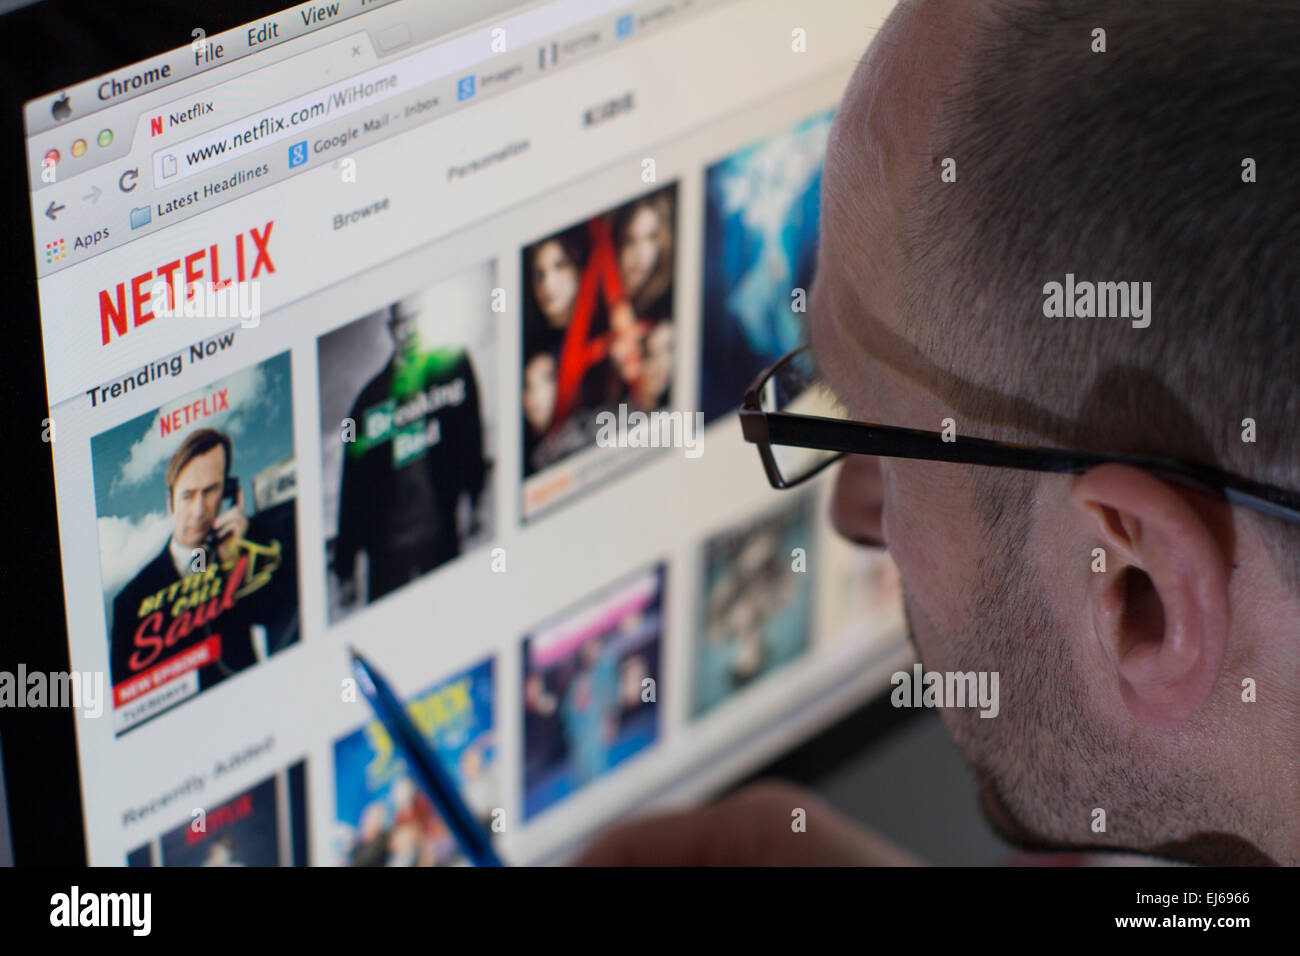 Male looking at the website of Netflix Television streaming service Stock Photo